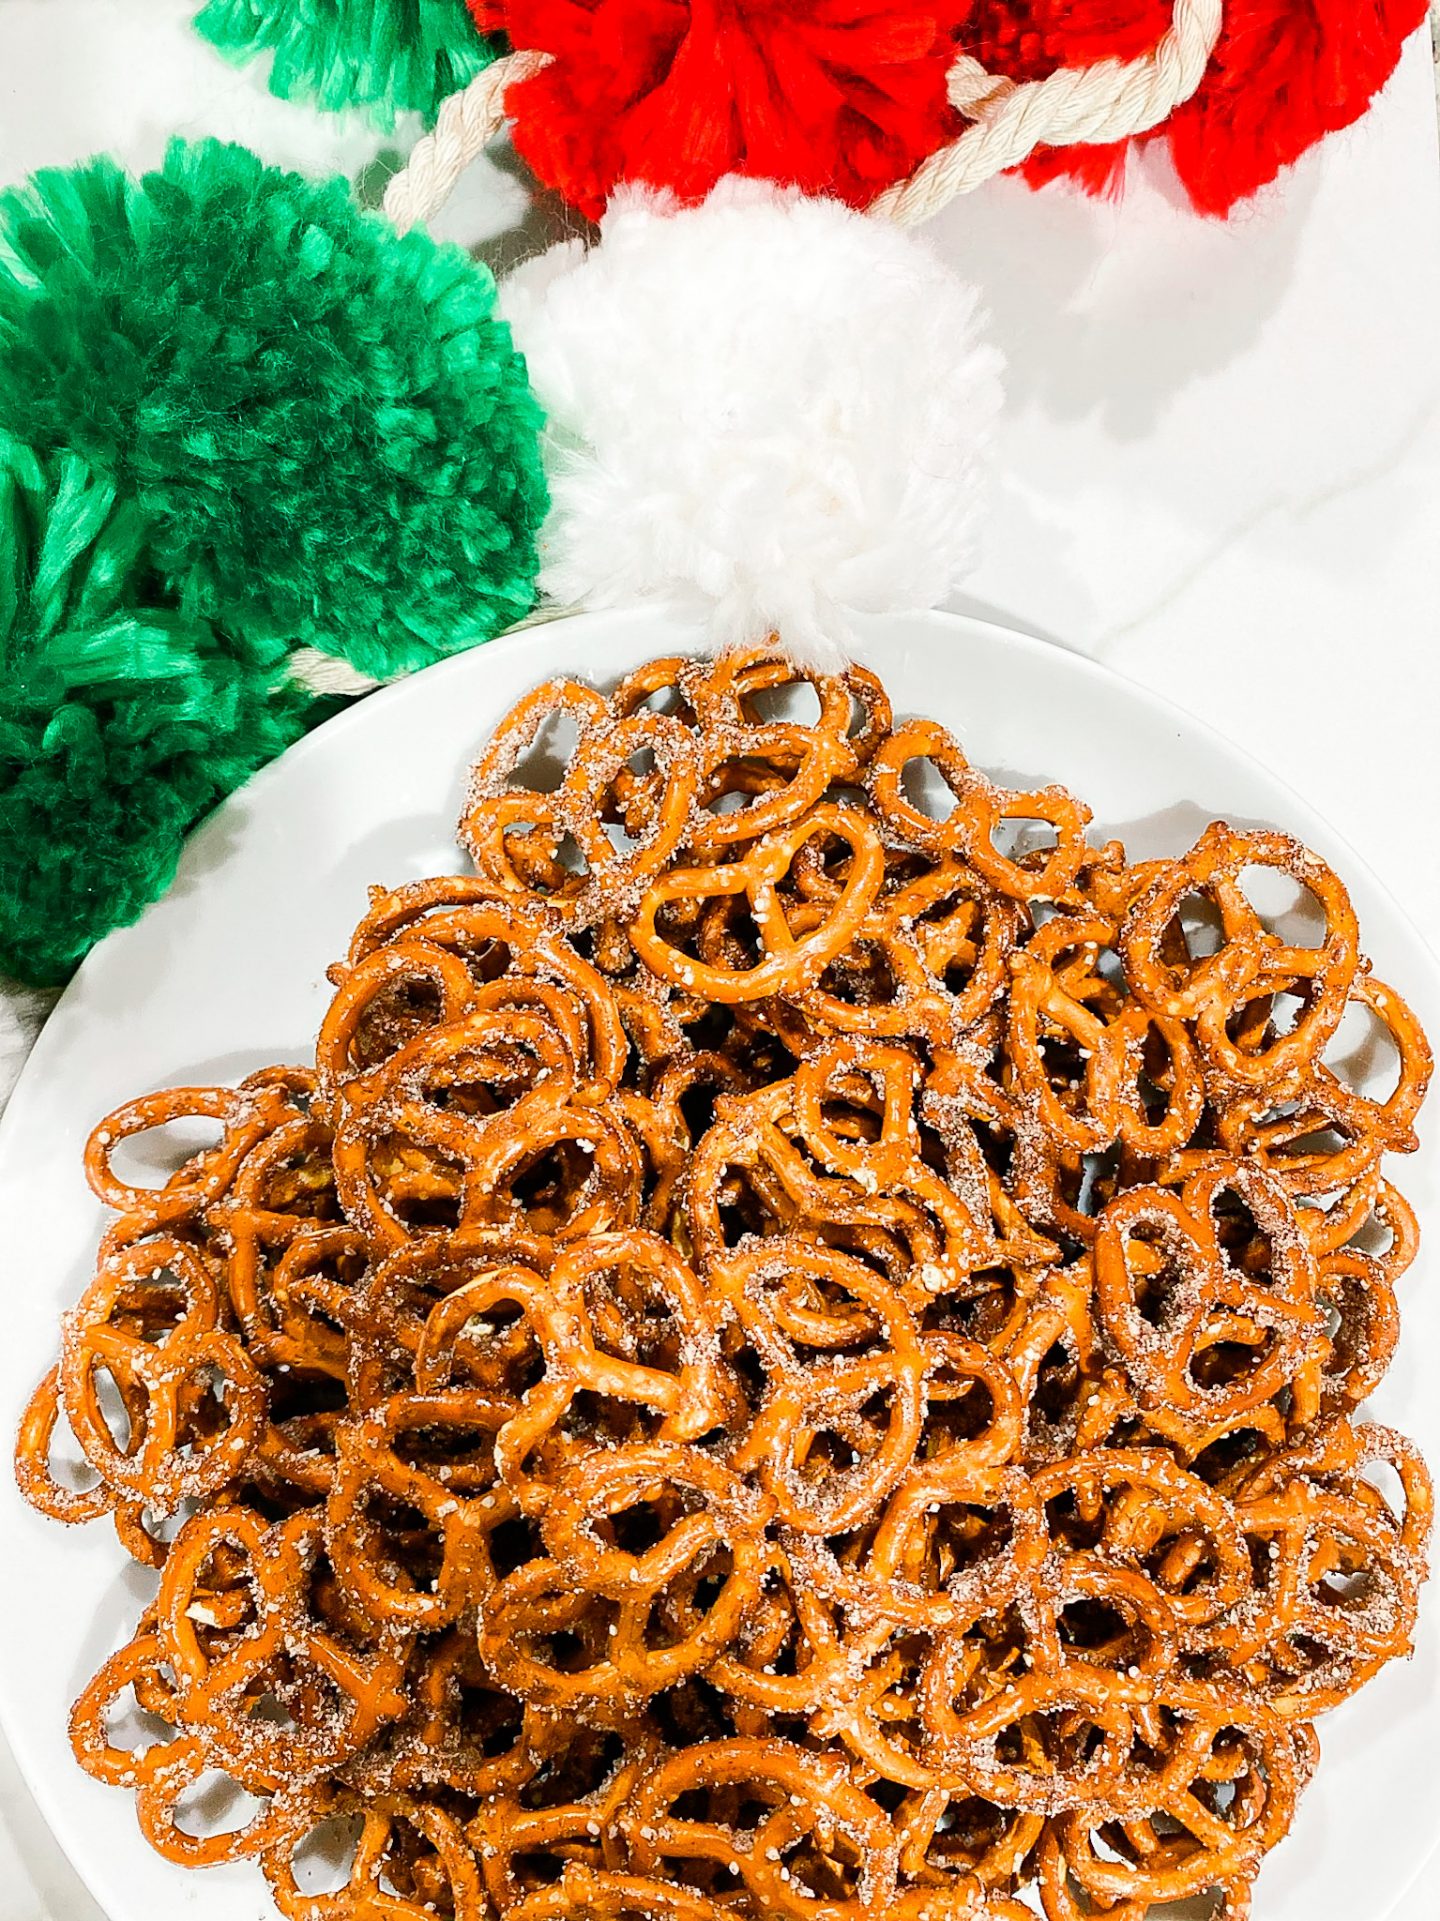 Cinnamon Sugar Pretzels by Alabama Life + Style blogger, Heather Brown // My Life Well Loved